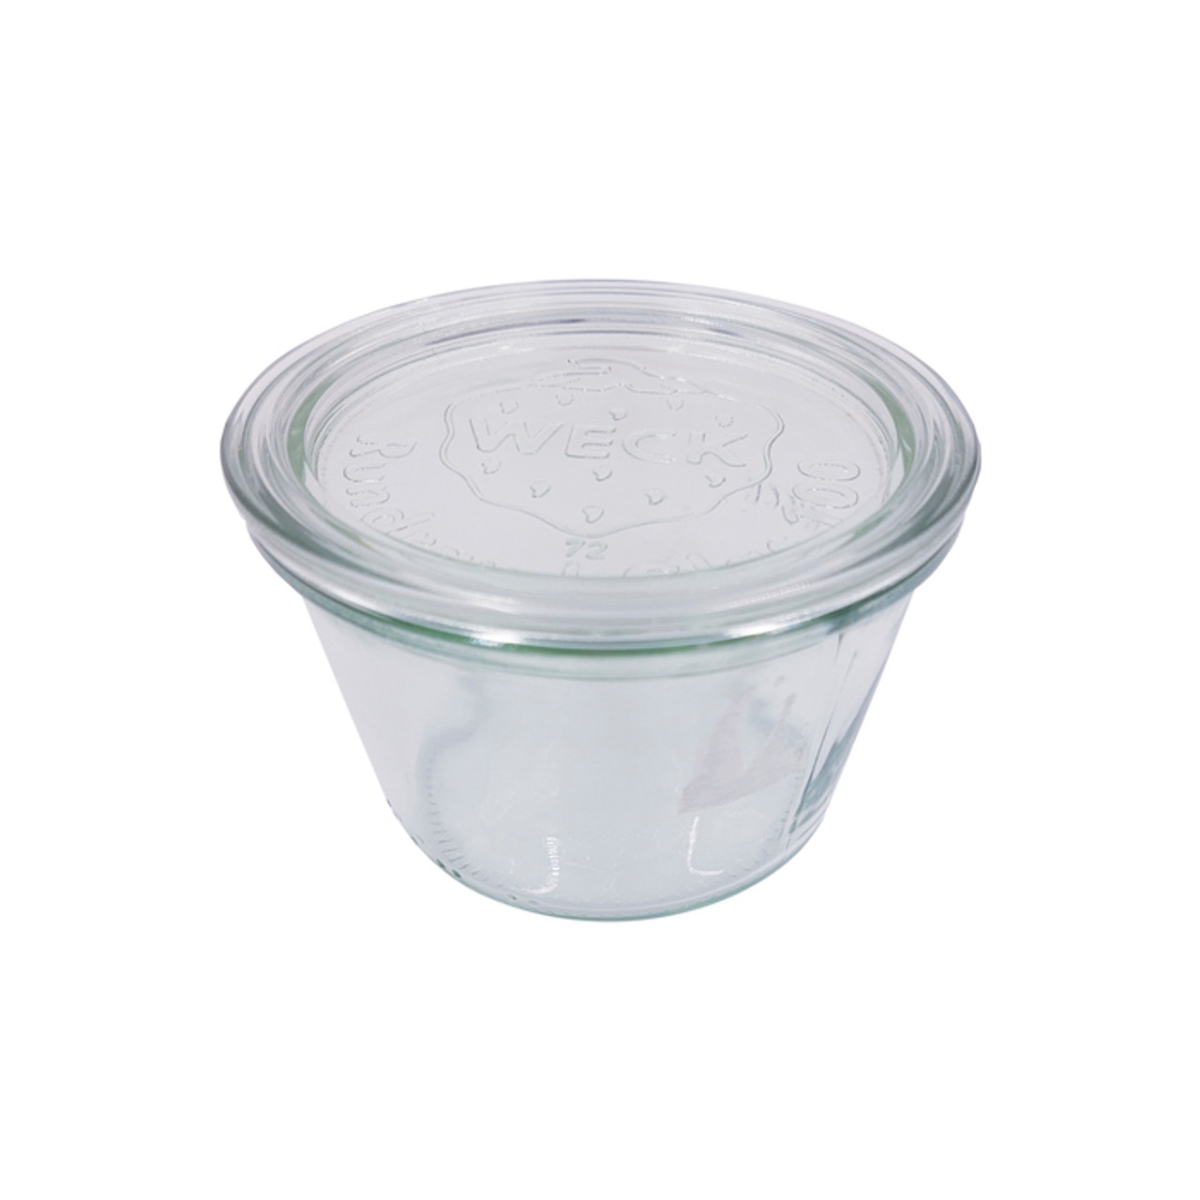 Picture of Packnwood 294WEK741 3.93 Dia. x 2.91 in. 12.5 oz Bokocook Reusable Weck Jars with Glass Lid Mold - 6 Piece